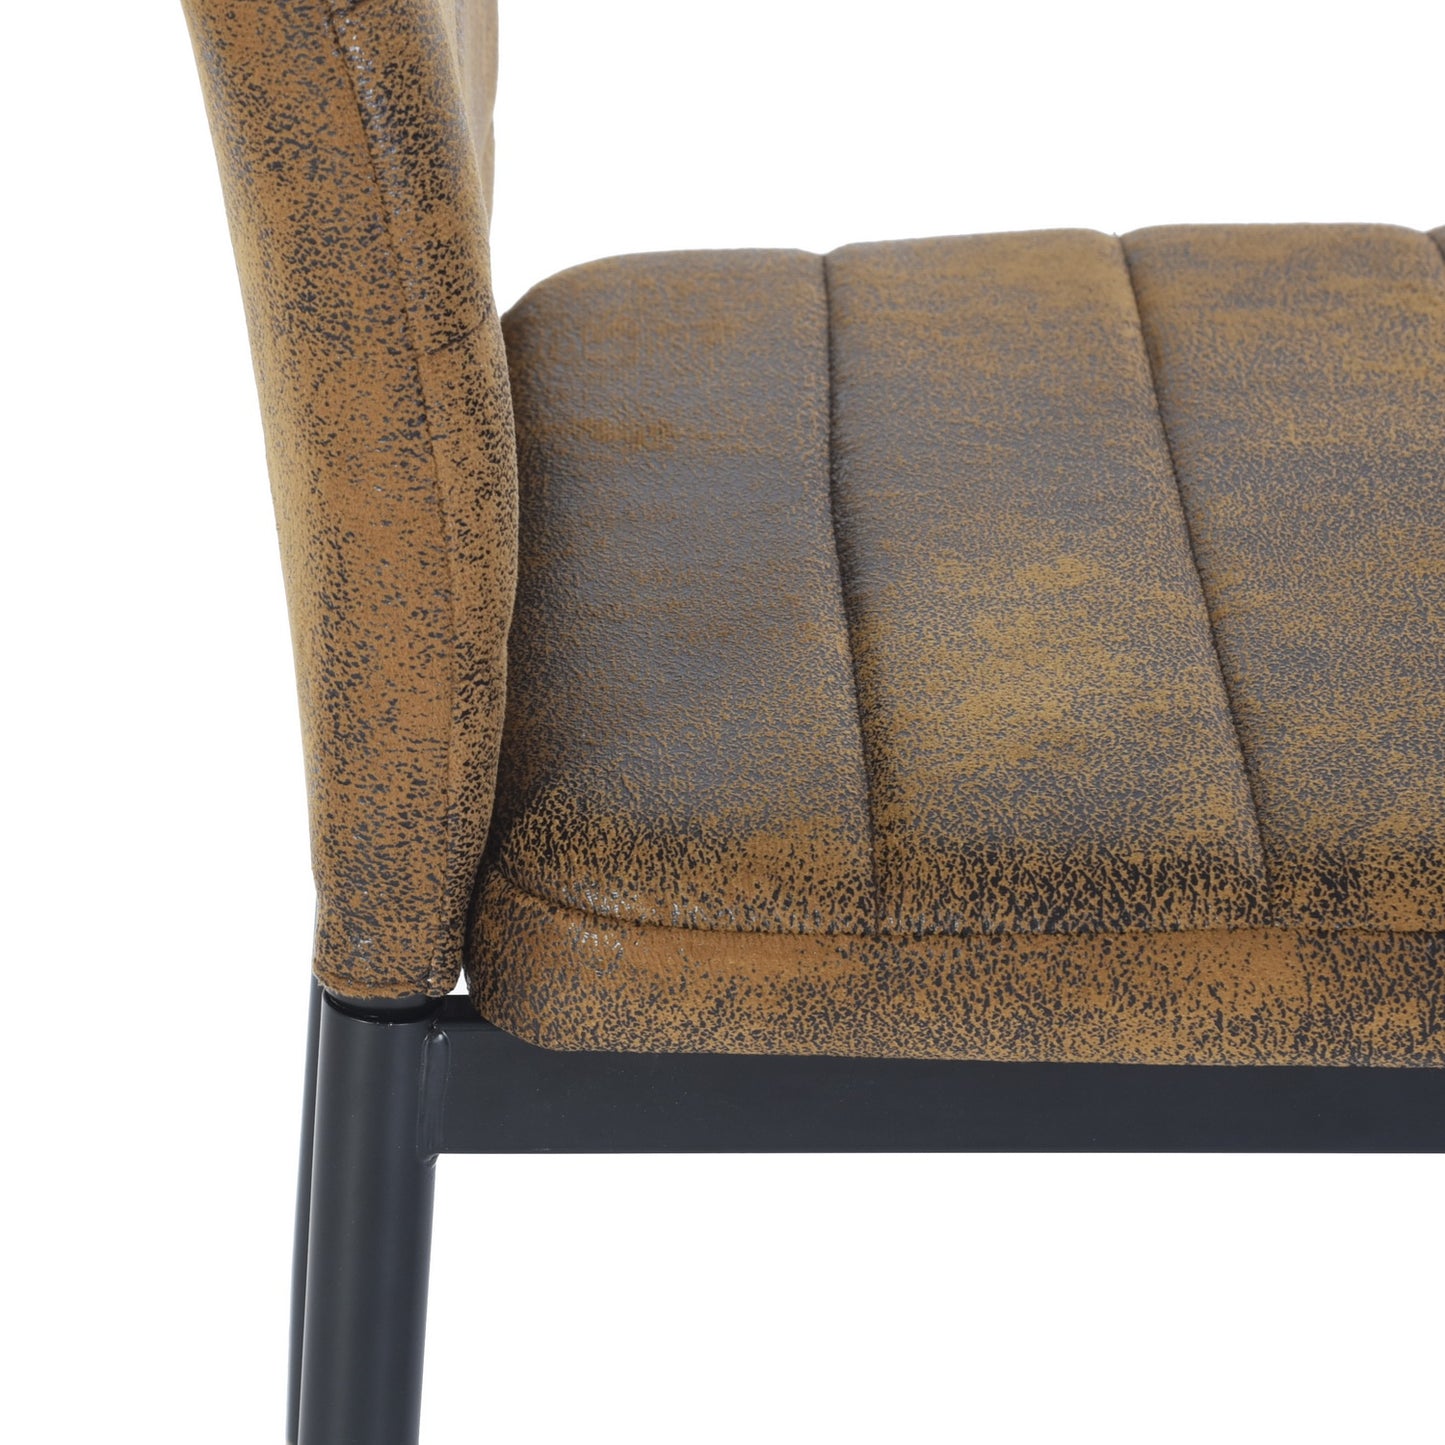 ANN SUEDE Dining Chair with Iron Legs - Brown